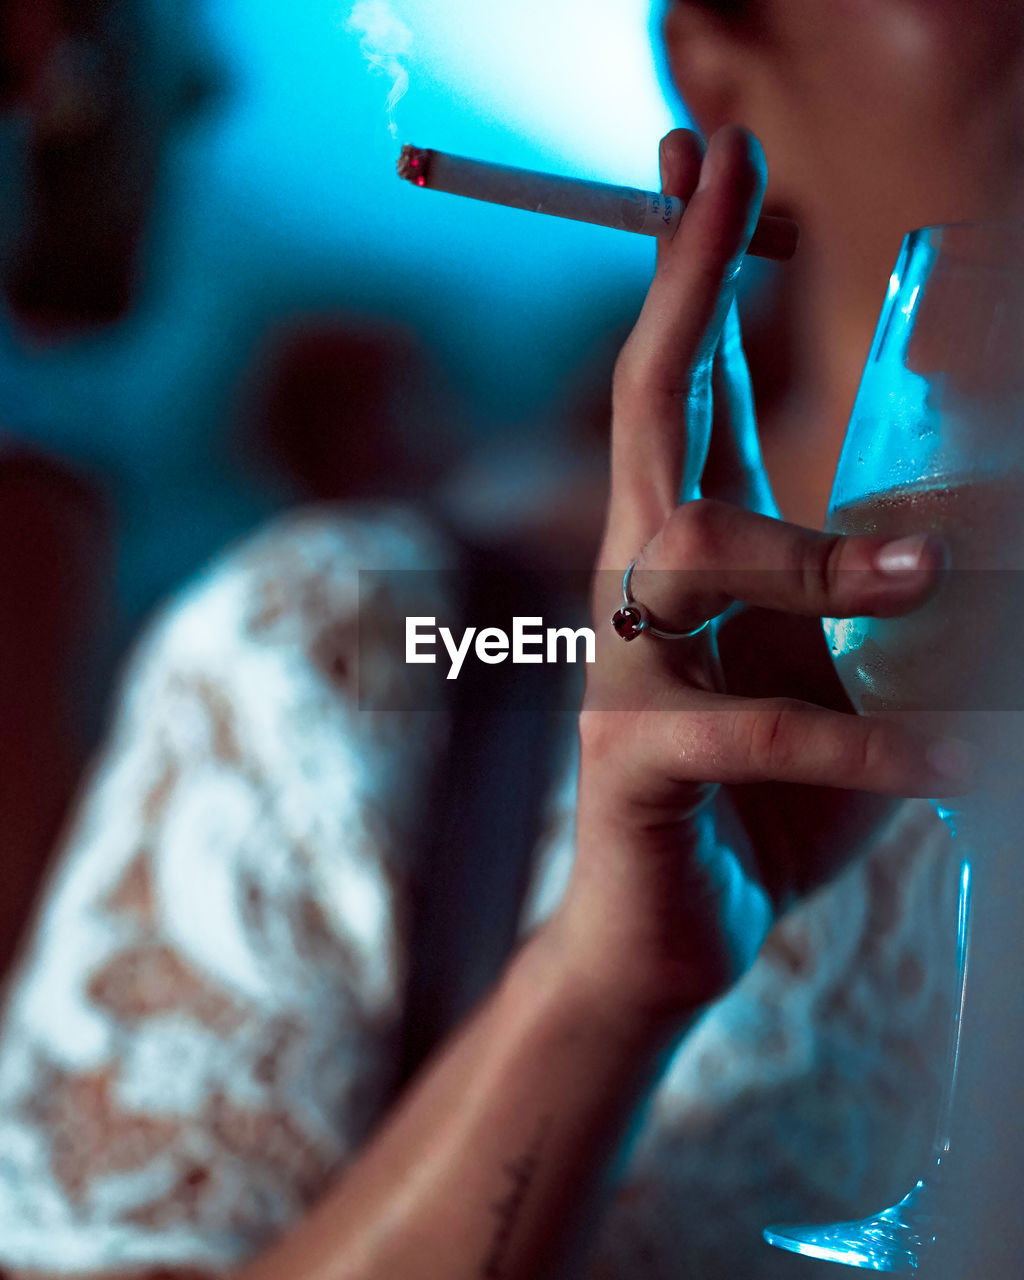 CLOSE-UP OF WOMAN HAND HOLDING CIGARETTE AGAINST BLURRED BACKGROUND